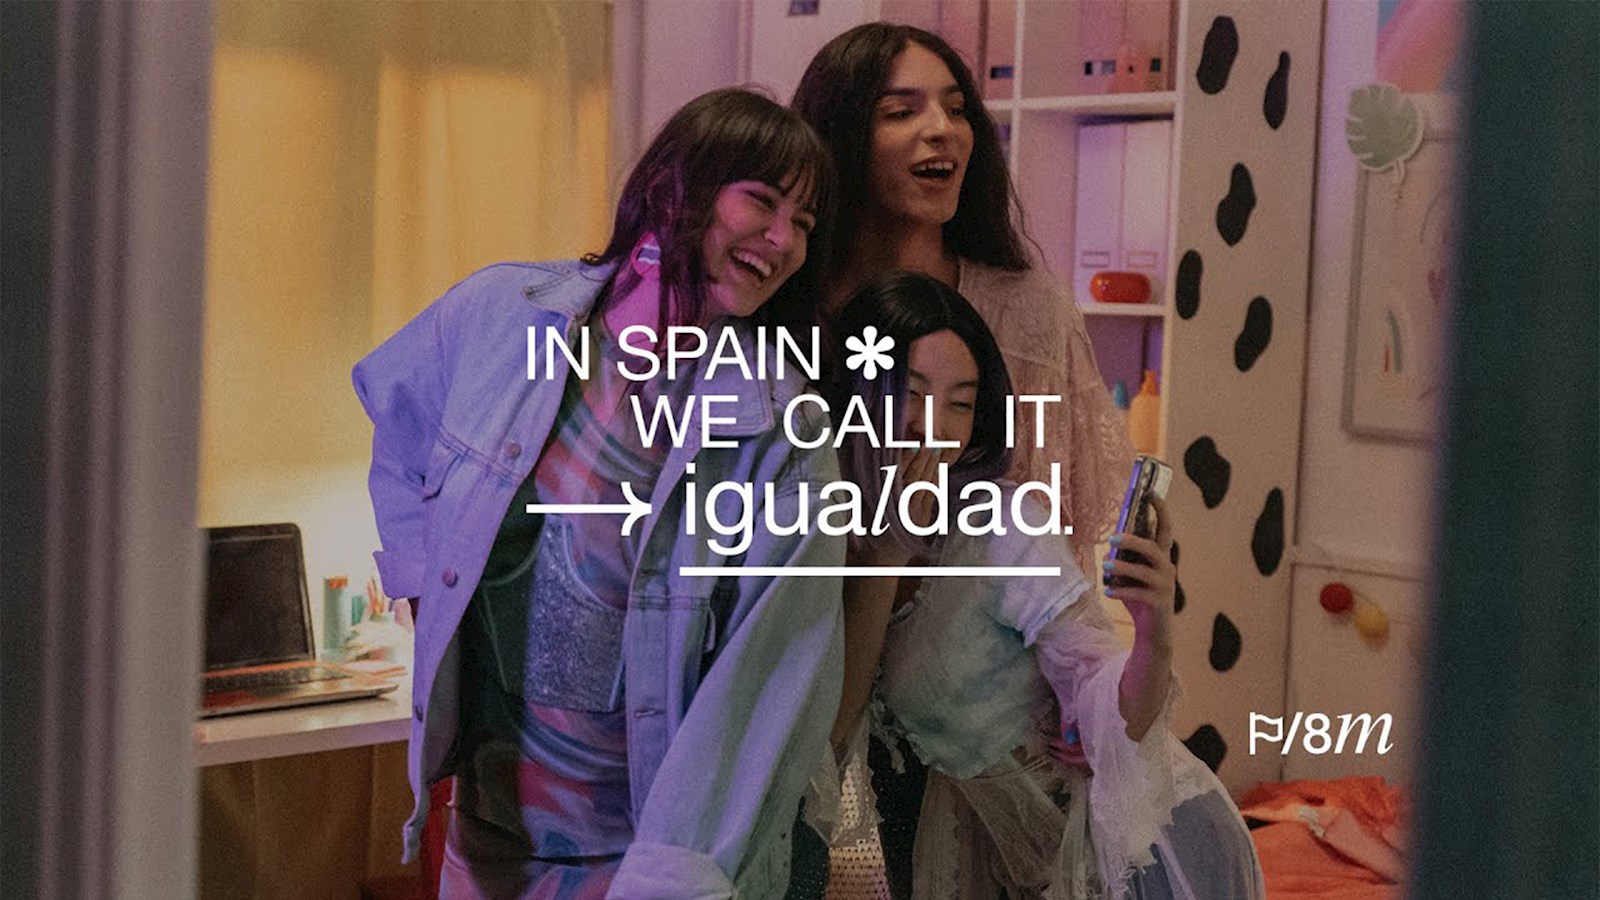 Group of girls having fun with text saying 'In In Spain we call it Equality'